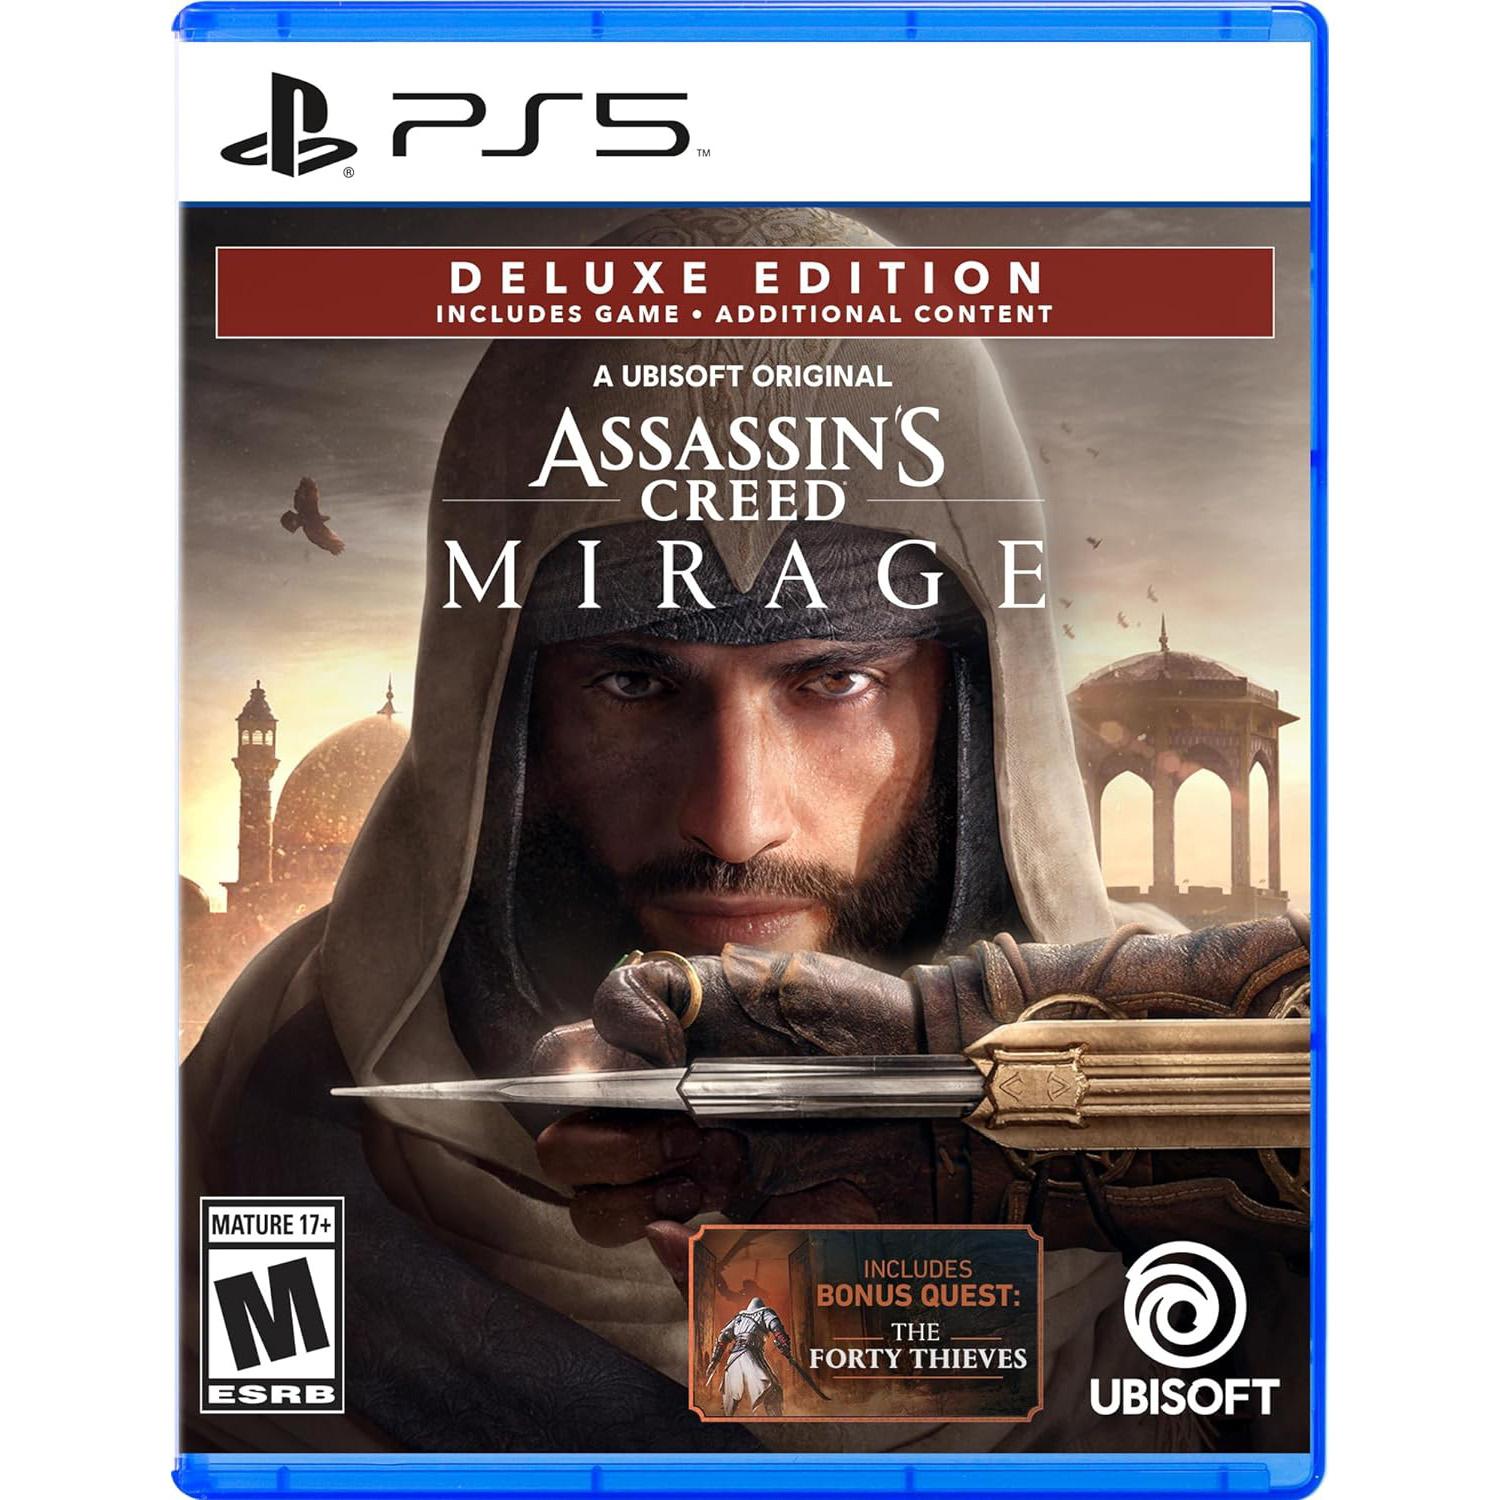 Assassins Creed Mirage Deluxe Edition PS5 PS4 Xbox for $39.99 Shipped